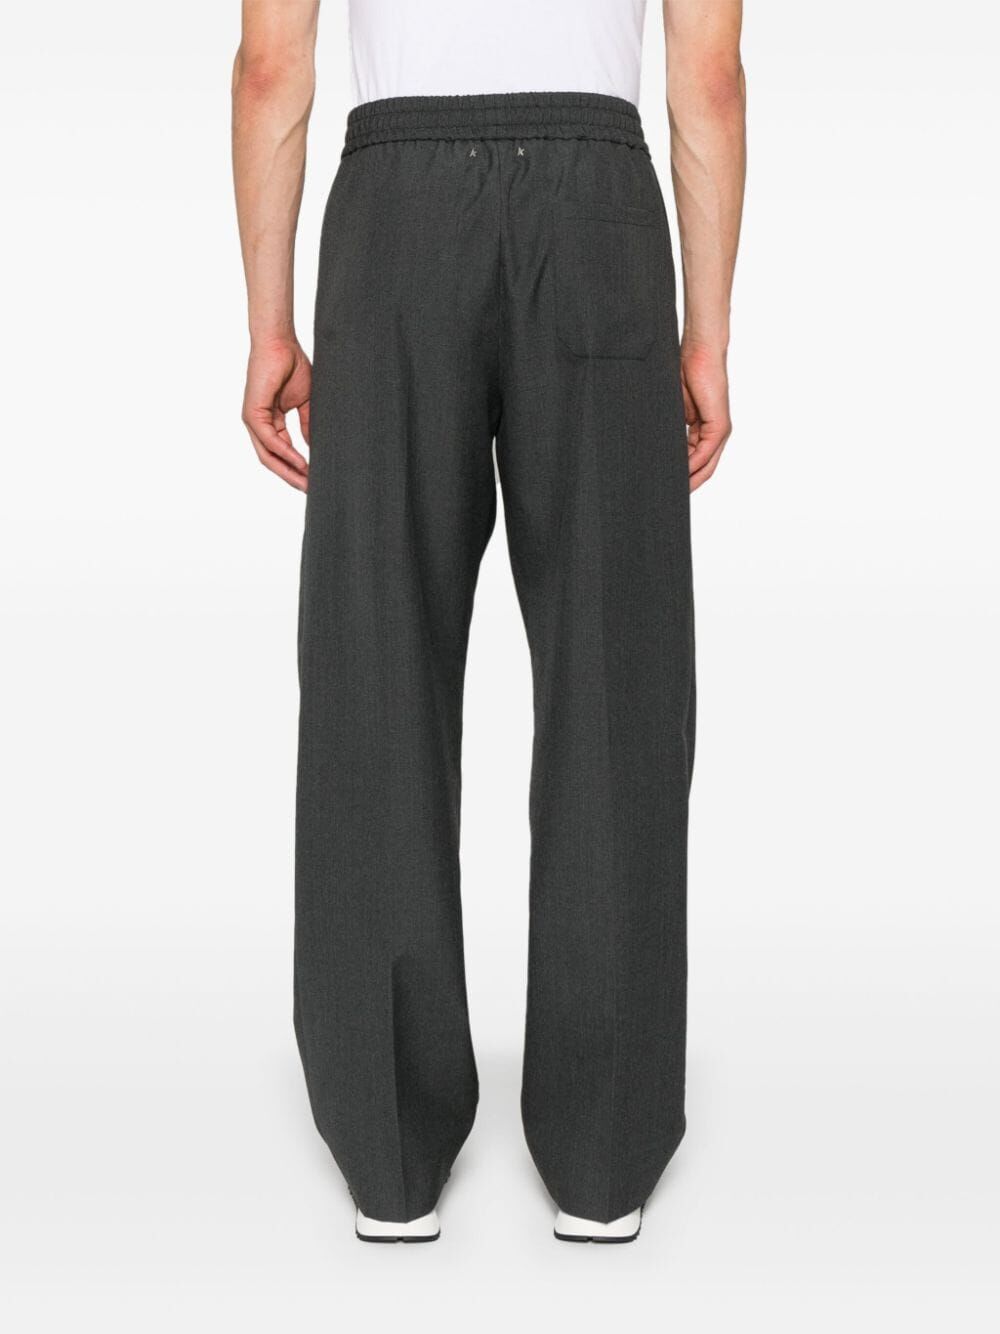 Journey M`s Lenny Jogging Pant Tailoring Yarn Died Vw Fabric